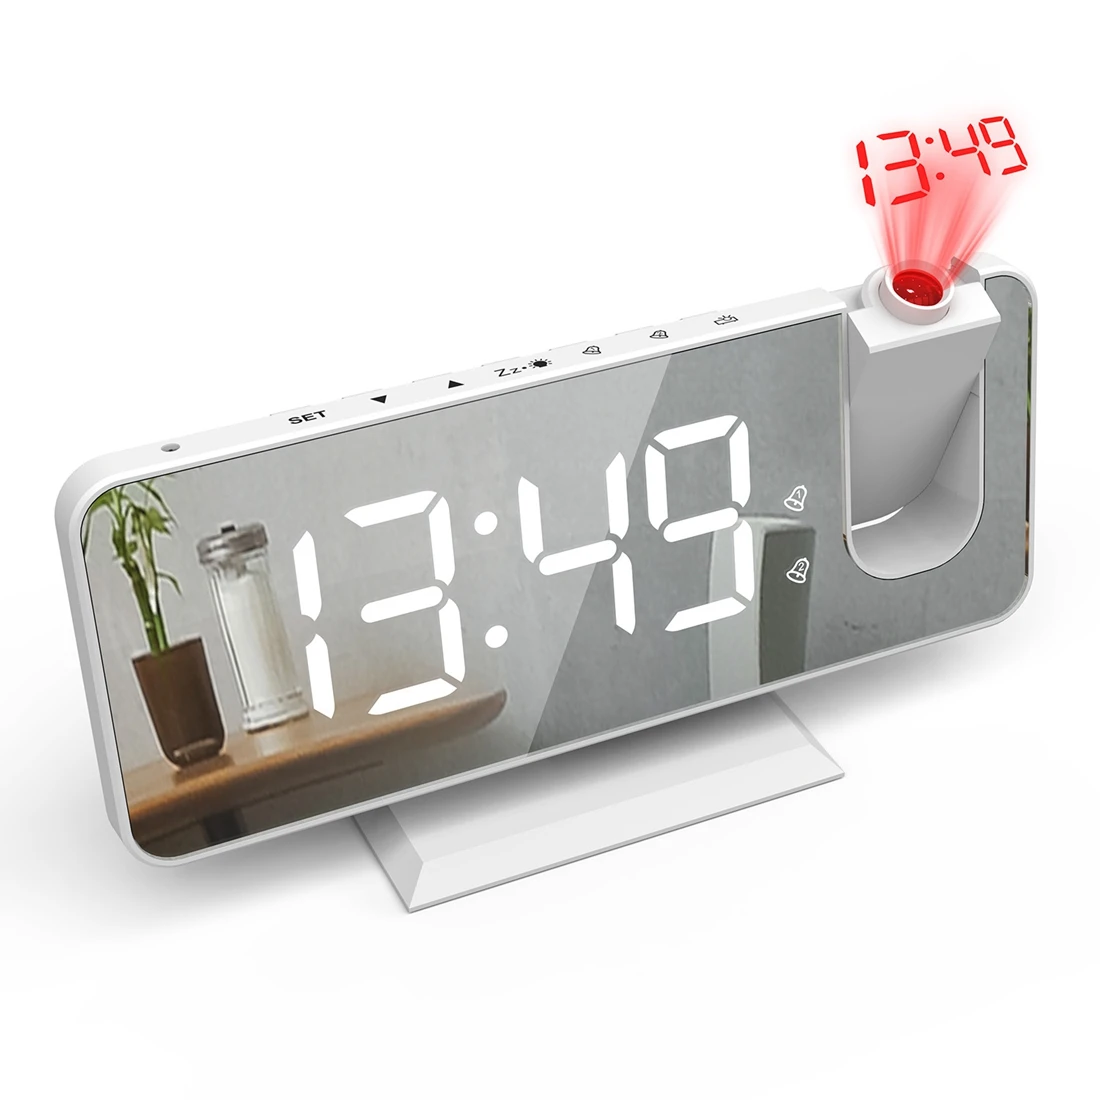 

LED Digital Alarm Clock Watch Table Electronic Desktop Clocks USB Wake Up Clock with 180° Time Projection Snooze White